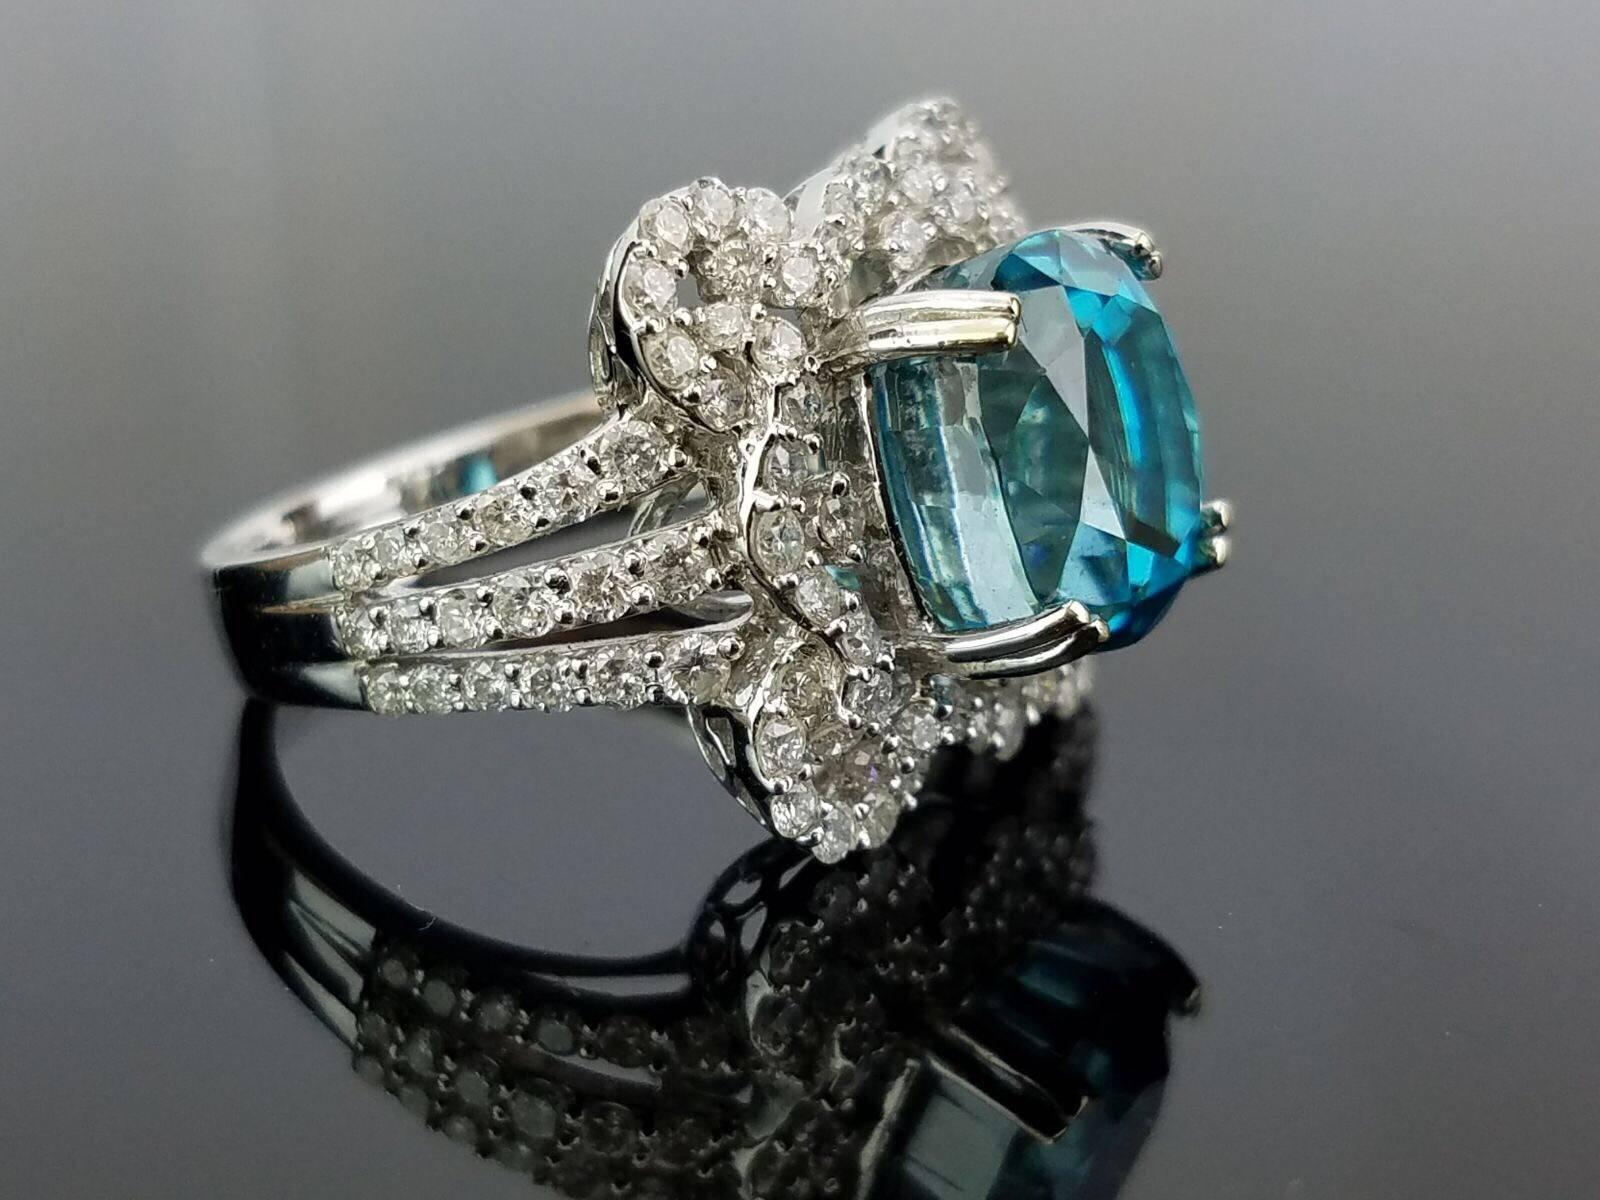 A cocktail ring with a very unique colored stone, blue zircon, set in 18 white gold and diamond.

Stone Details:  
Stone: Blue Zircon
Cut: Oval 
Carat Weight: 9.75 Carat  

Diamond Details: 
Cut: Brilliant cut 
Total Carat Weight: 1.35 carat